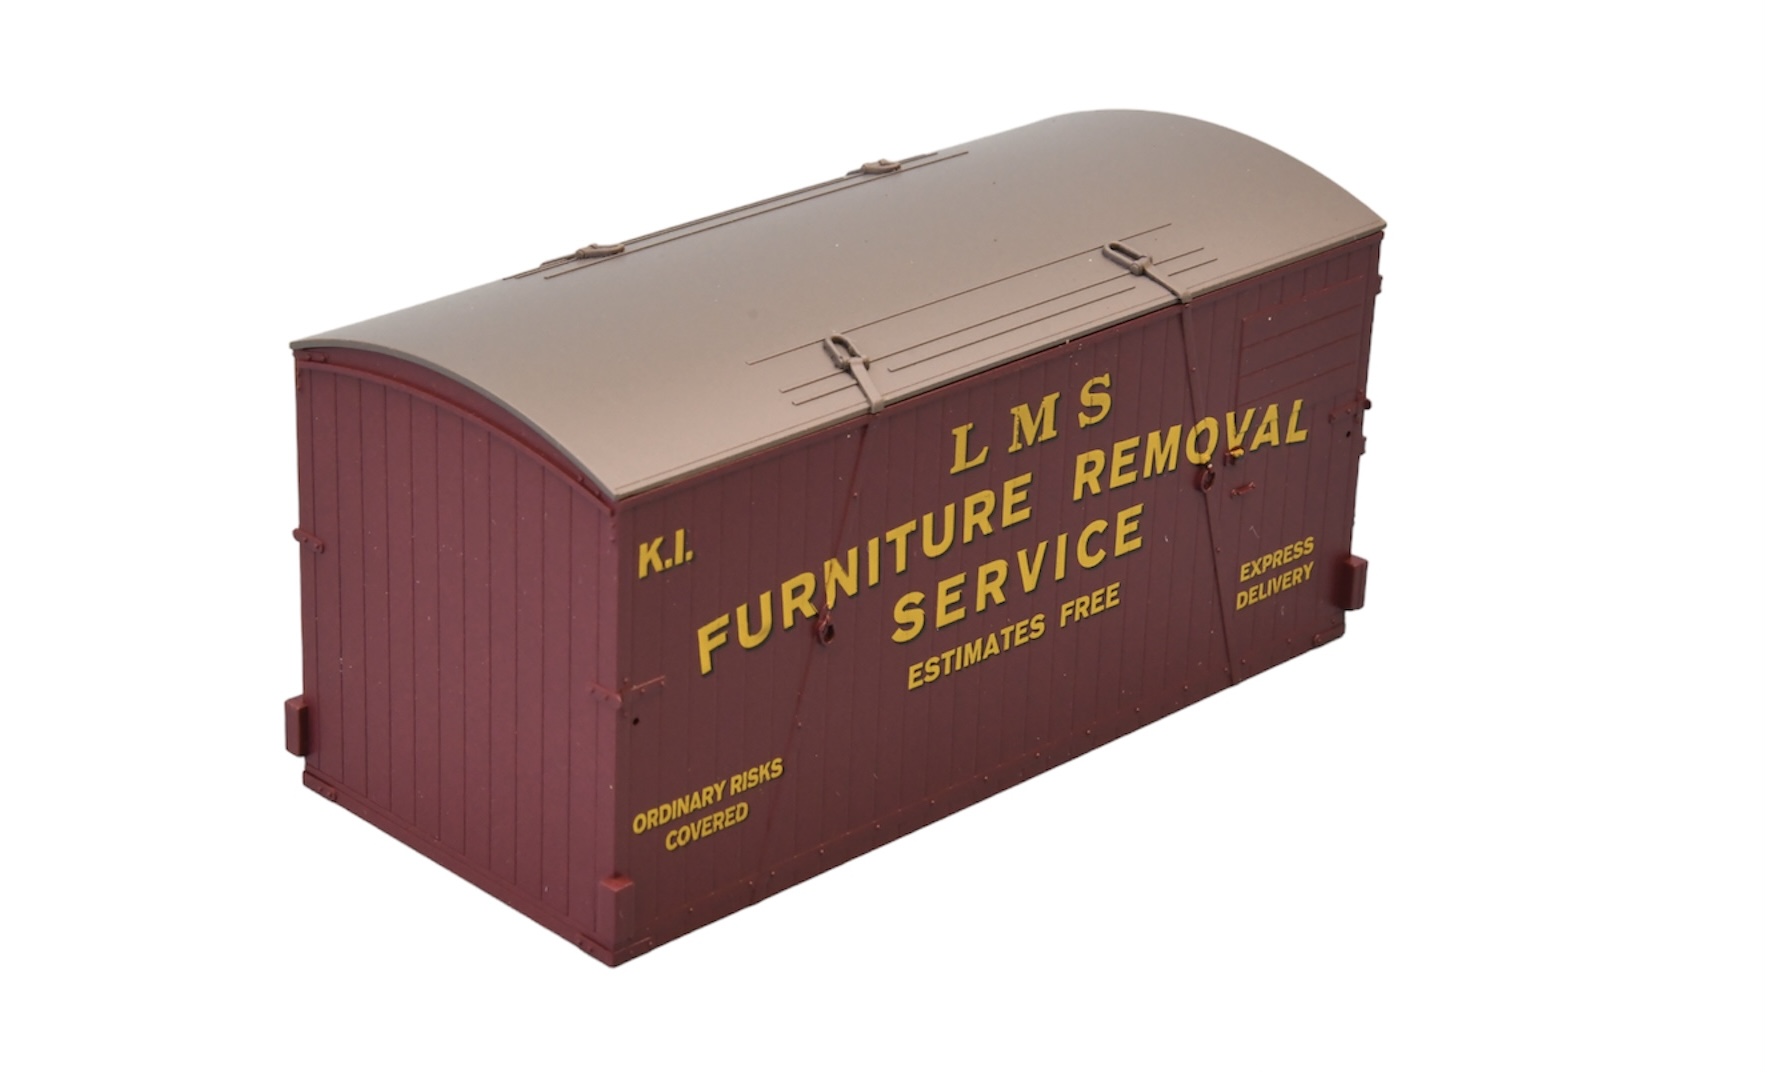 7F-037-017  Container LMS Furniture Removal